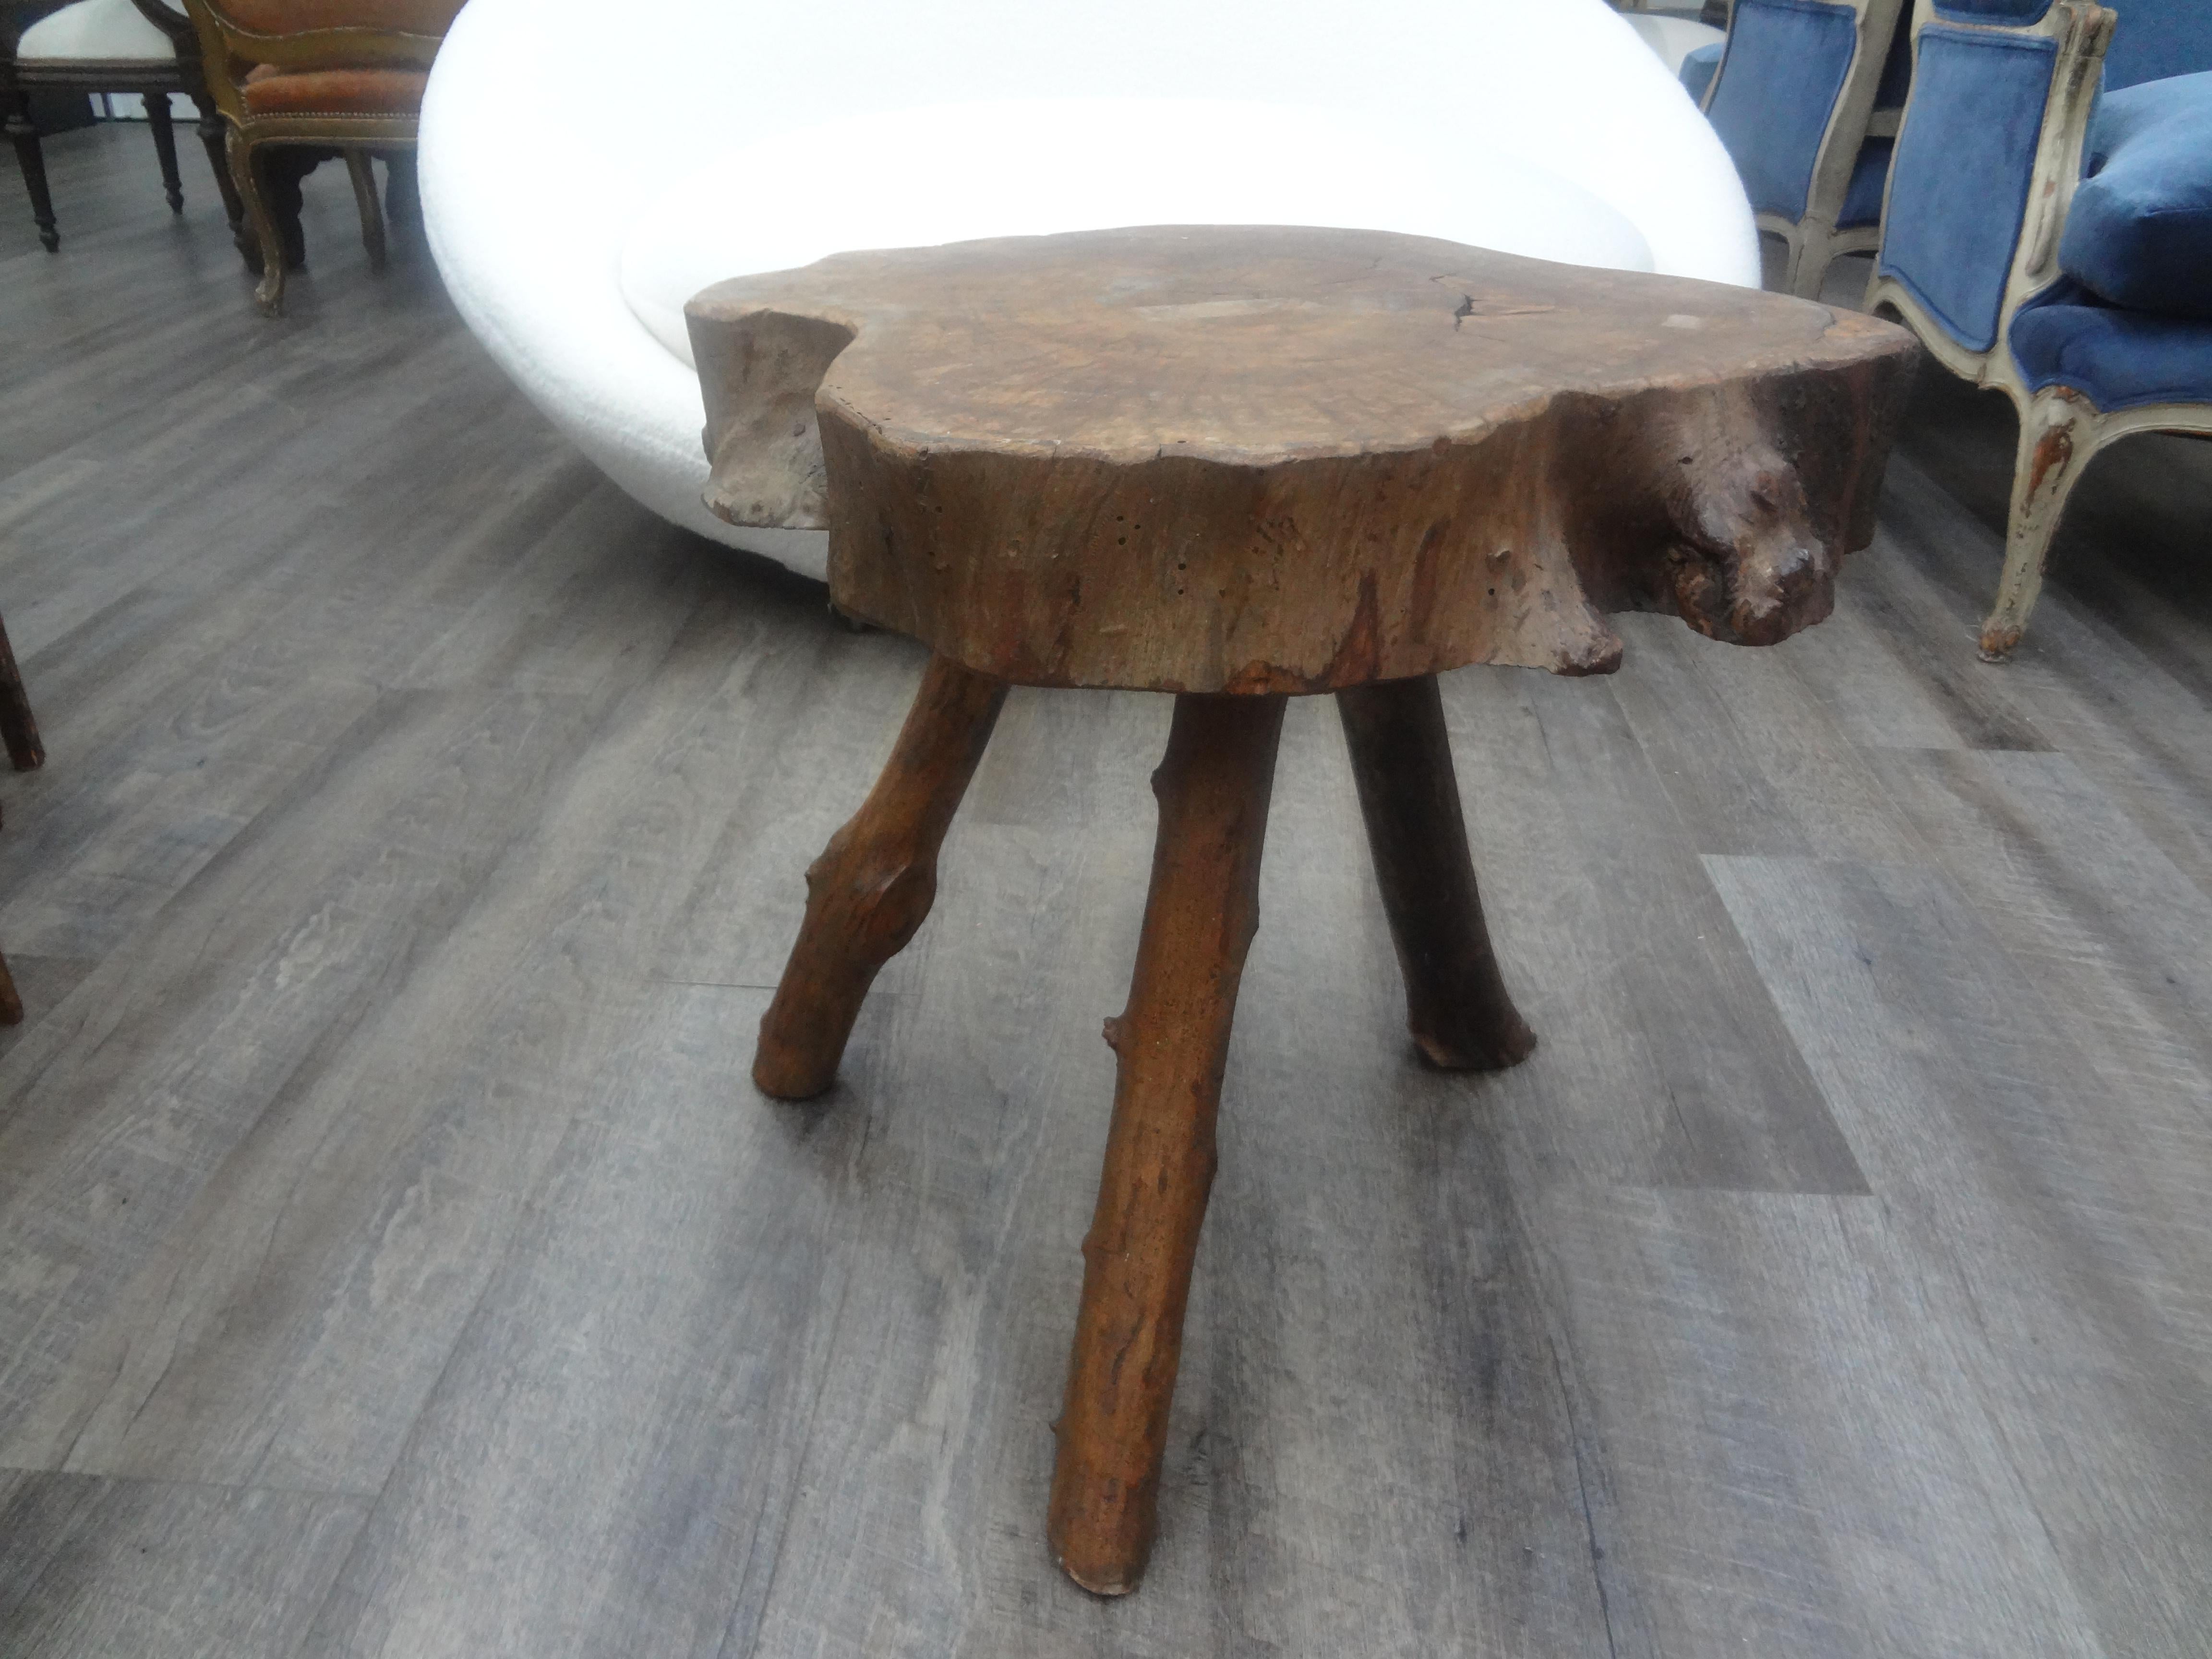 Mid Century French Root Table.
This stunning root table, sourced in France was expertly created by a skilled artisan.
Our handsome Organic modern or primitive root table is versatile in that it will work in a variety of interiors including rustic,